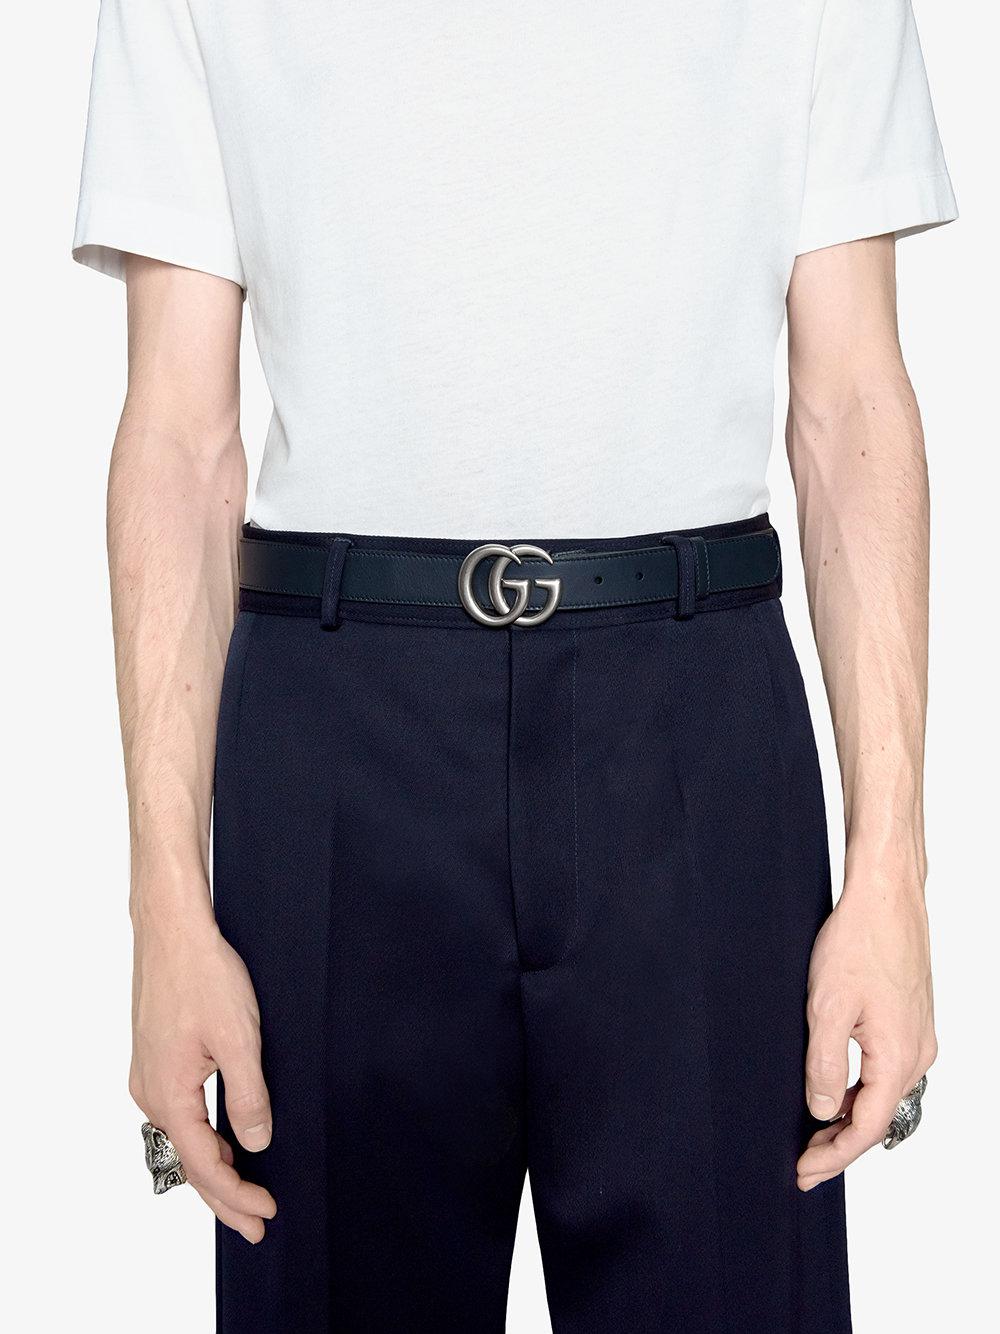 gucci double g leather belt